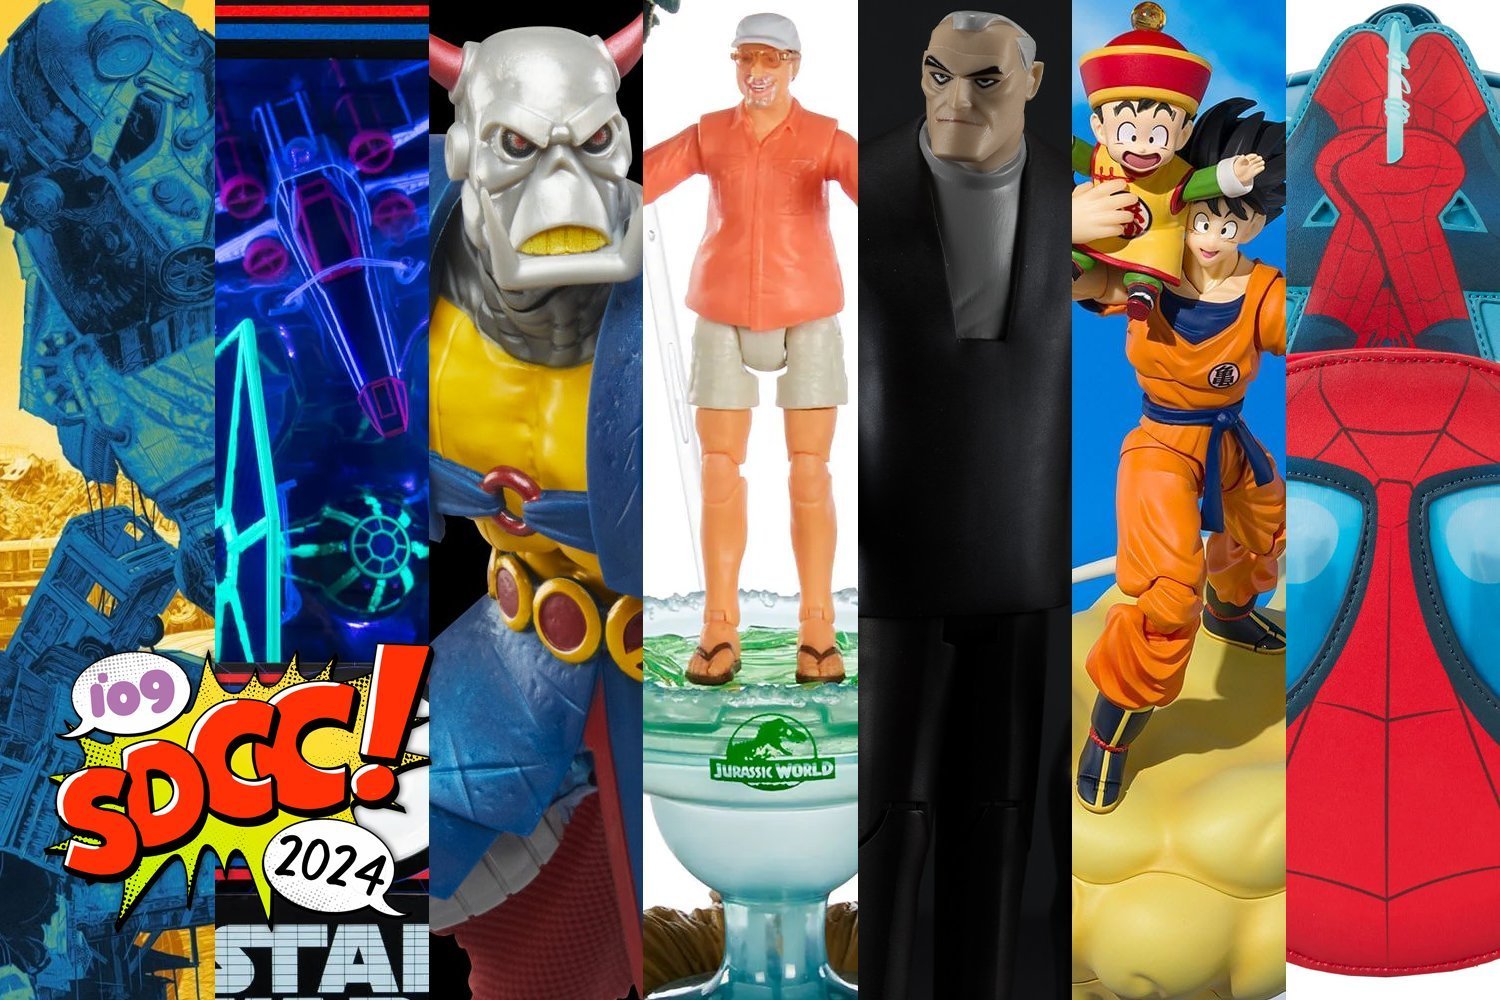 The Coolest Exclusive Toys and Collectibles at San Diego Comic-Con 2024